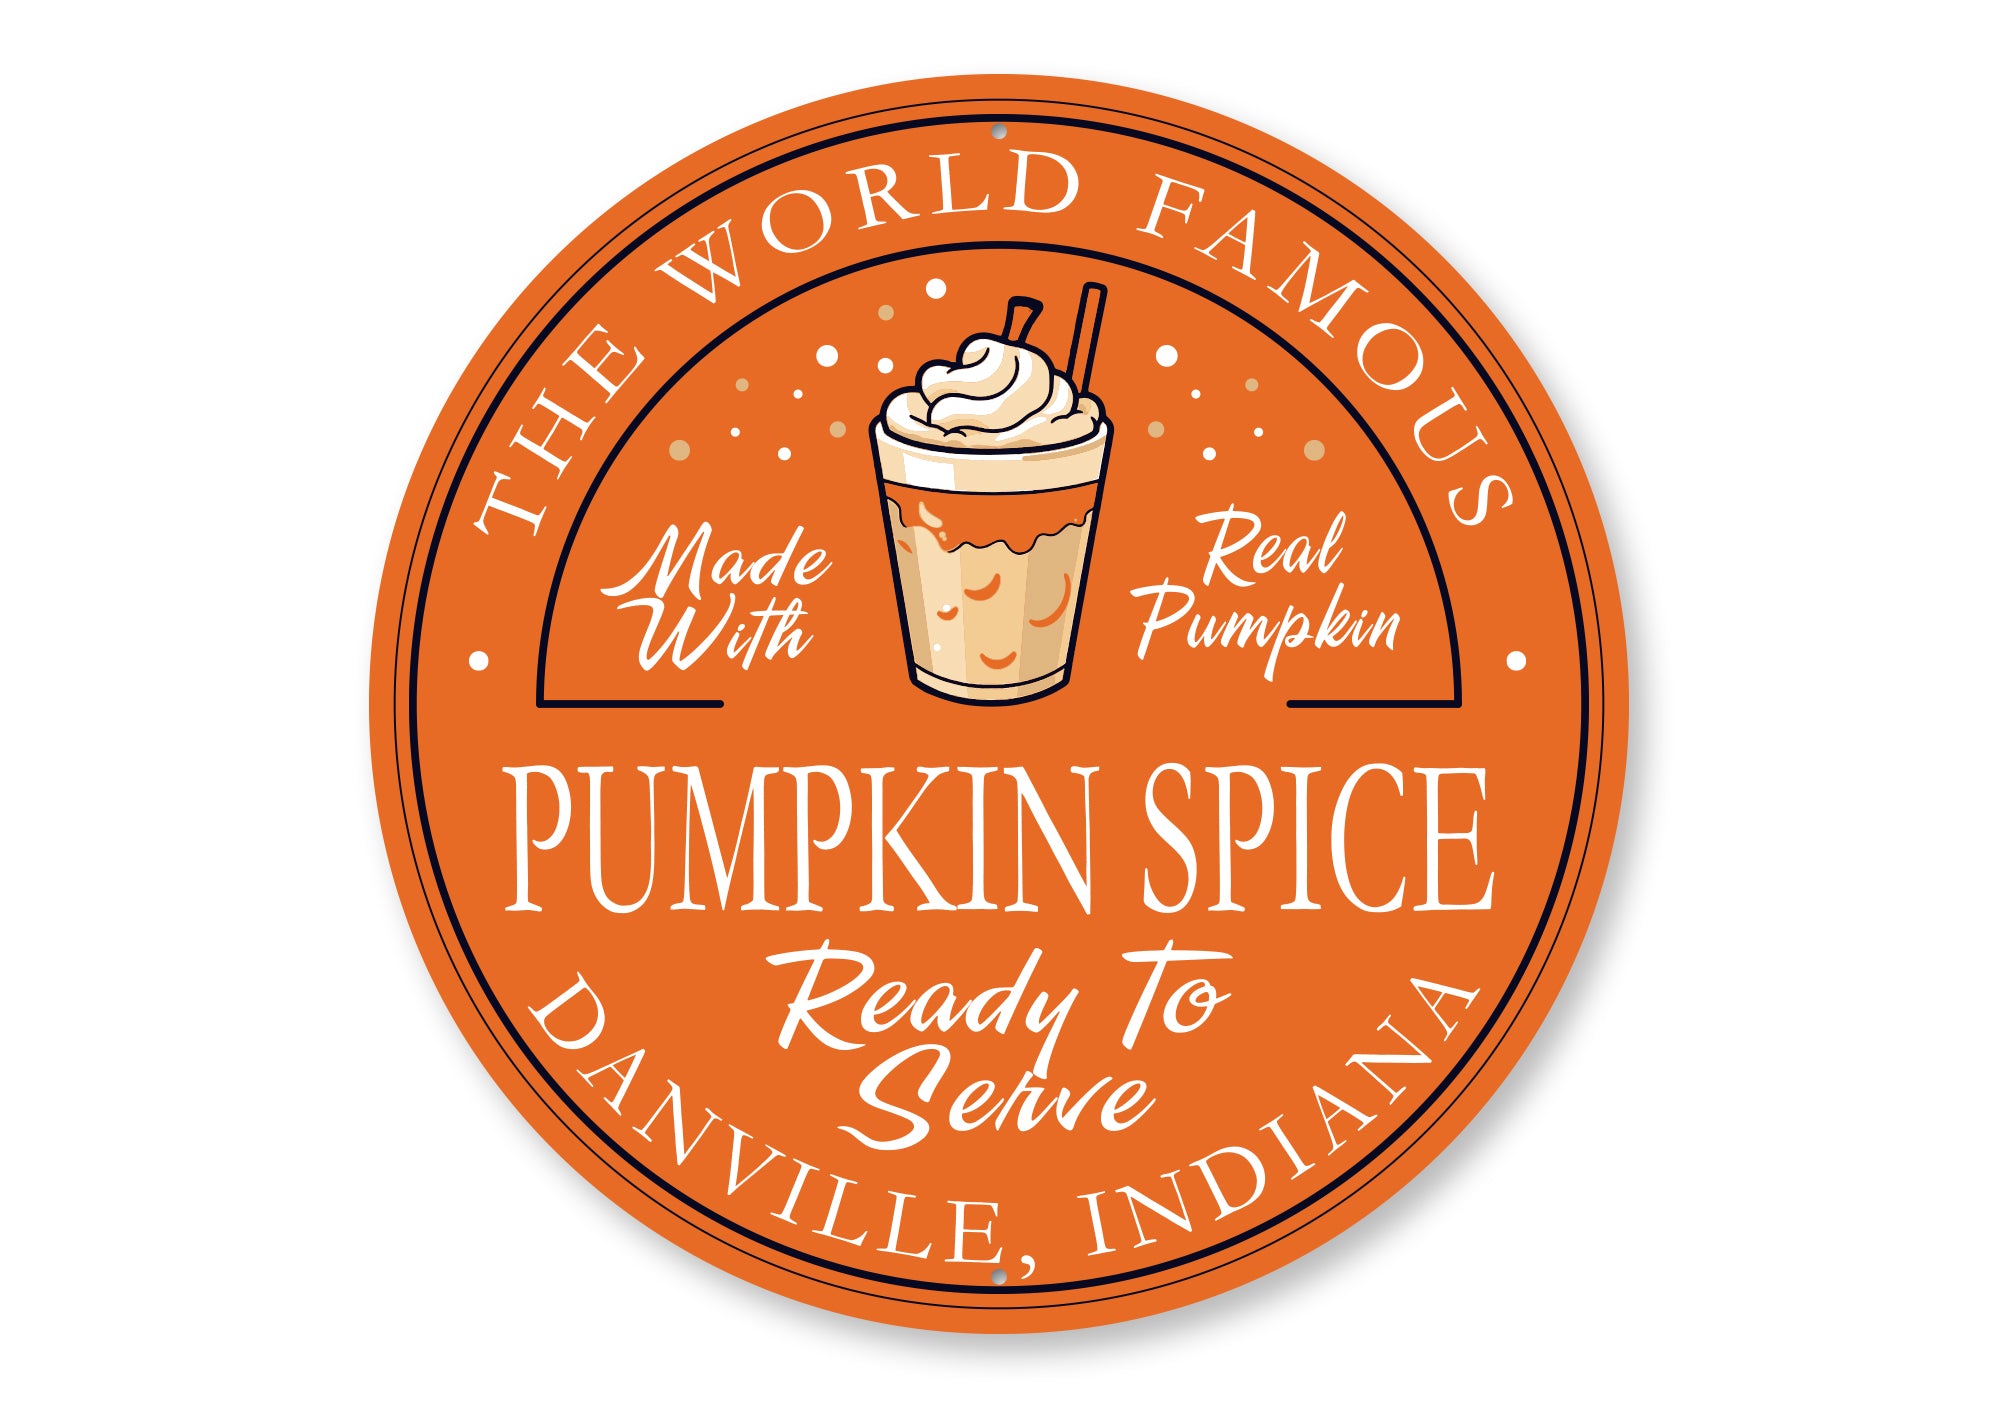 World Famous Pumpkin Spice Ready To Serve Round Sign